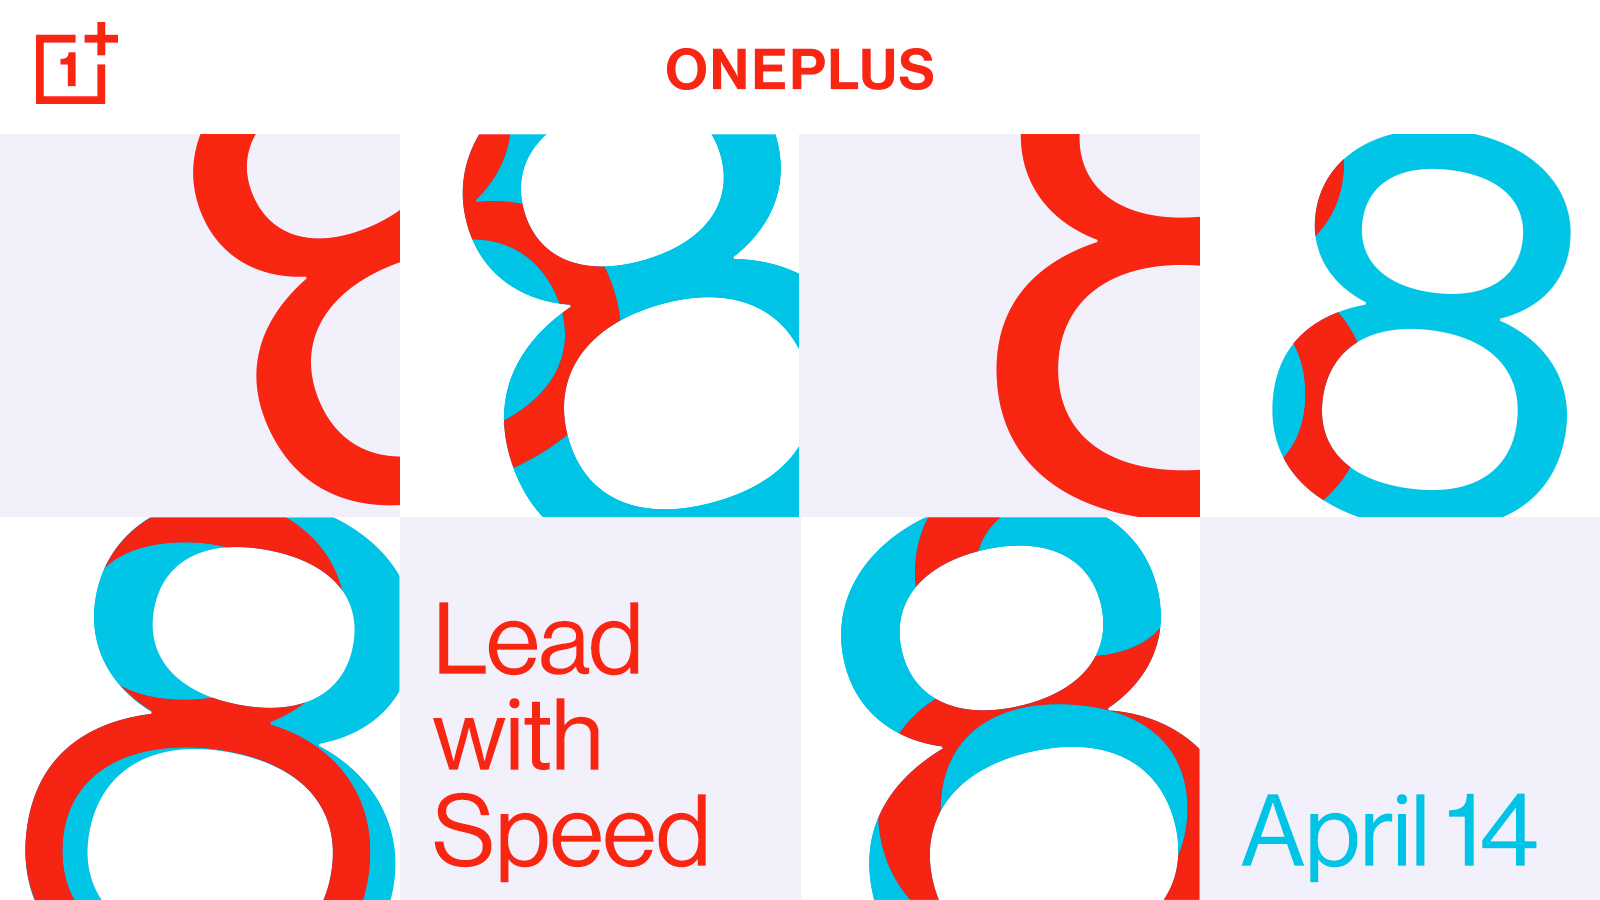 OnePlus 8 Series Design Details Confirmed Ahead of April 14 Launch